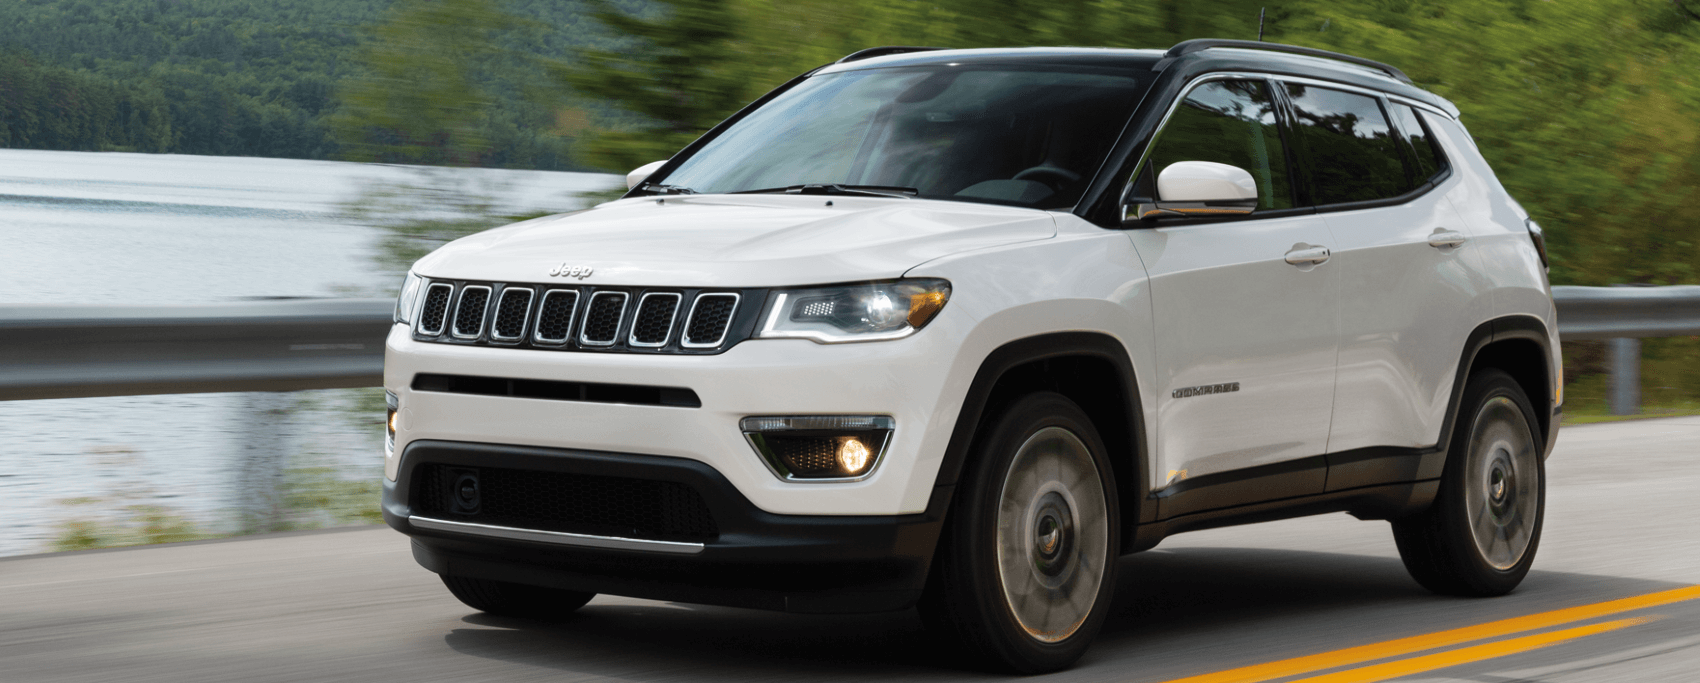 Test Drive The 2021 Jeep Compass Today!